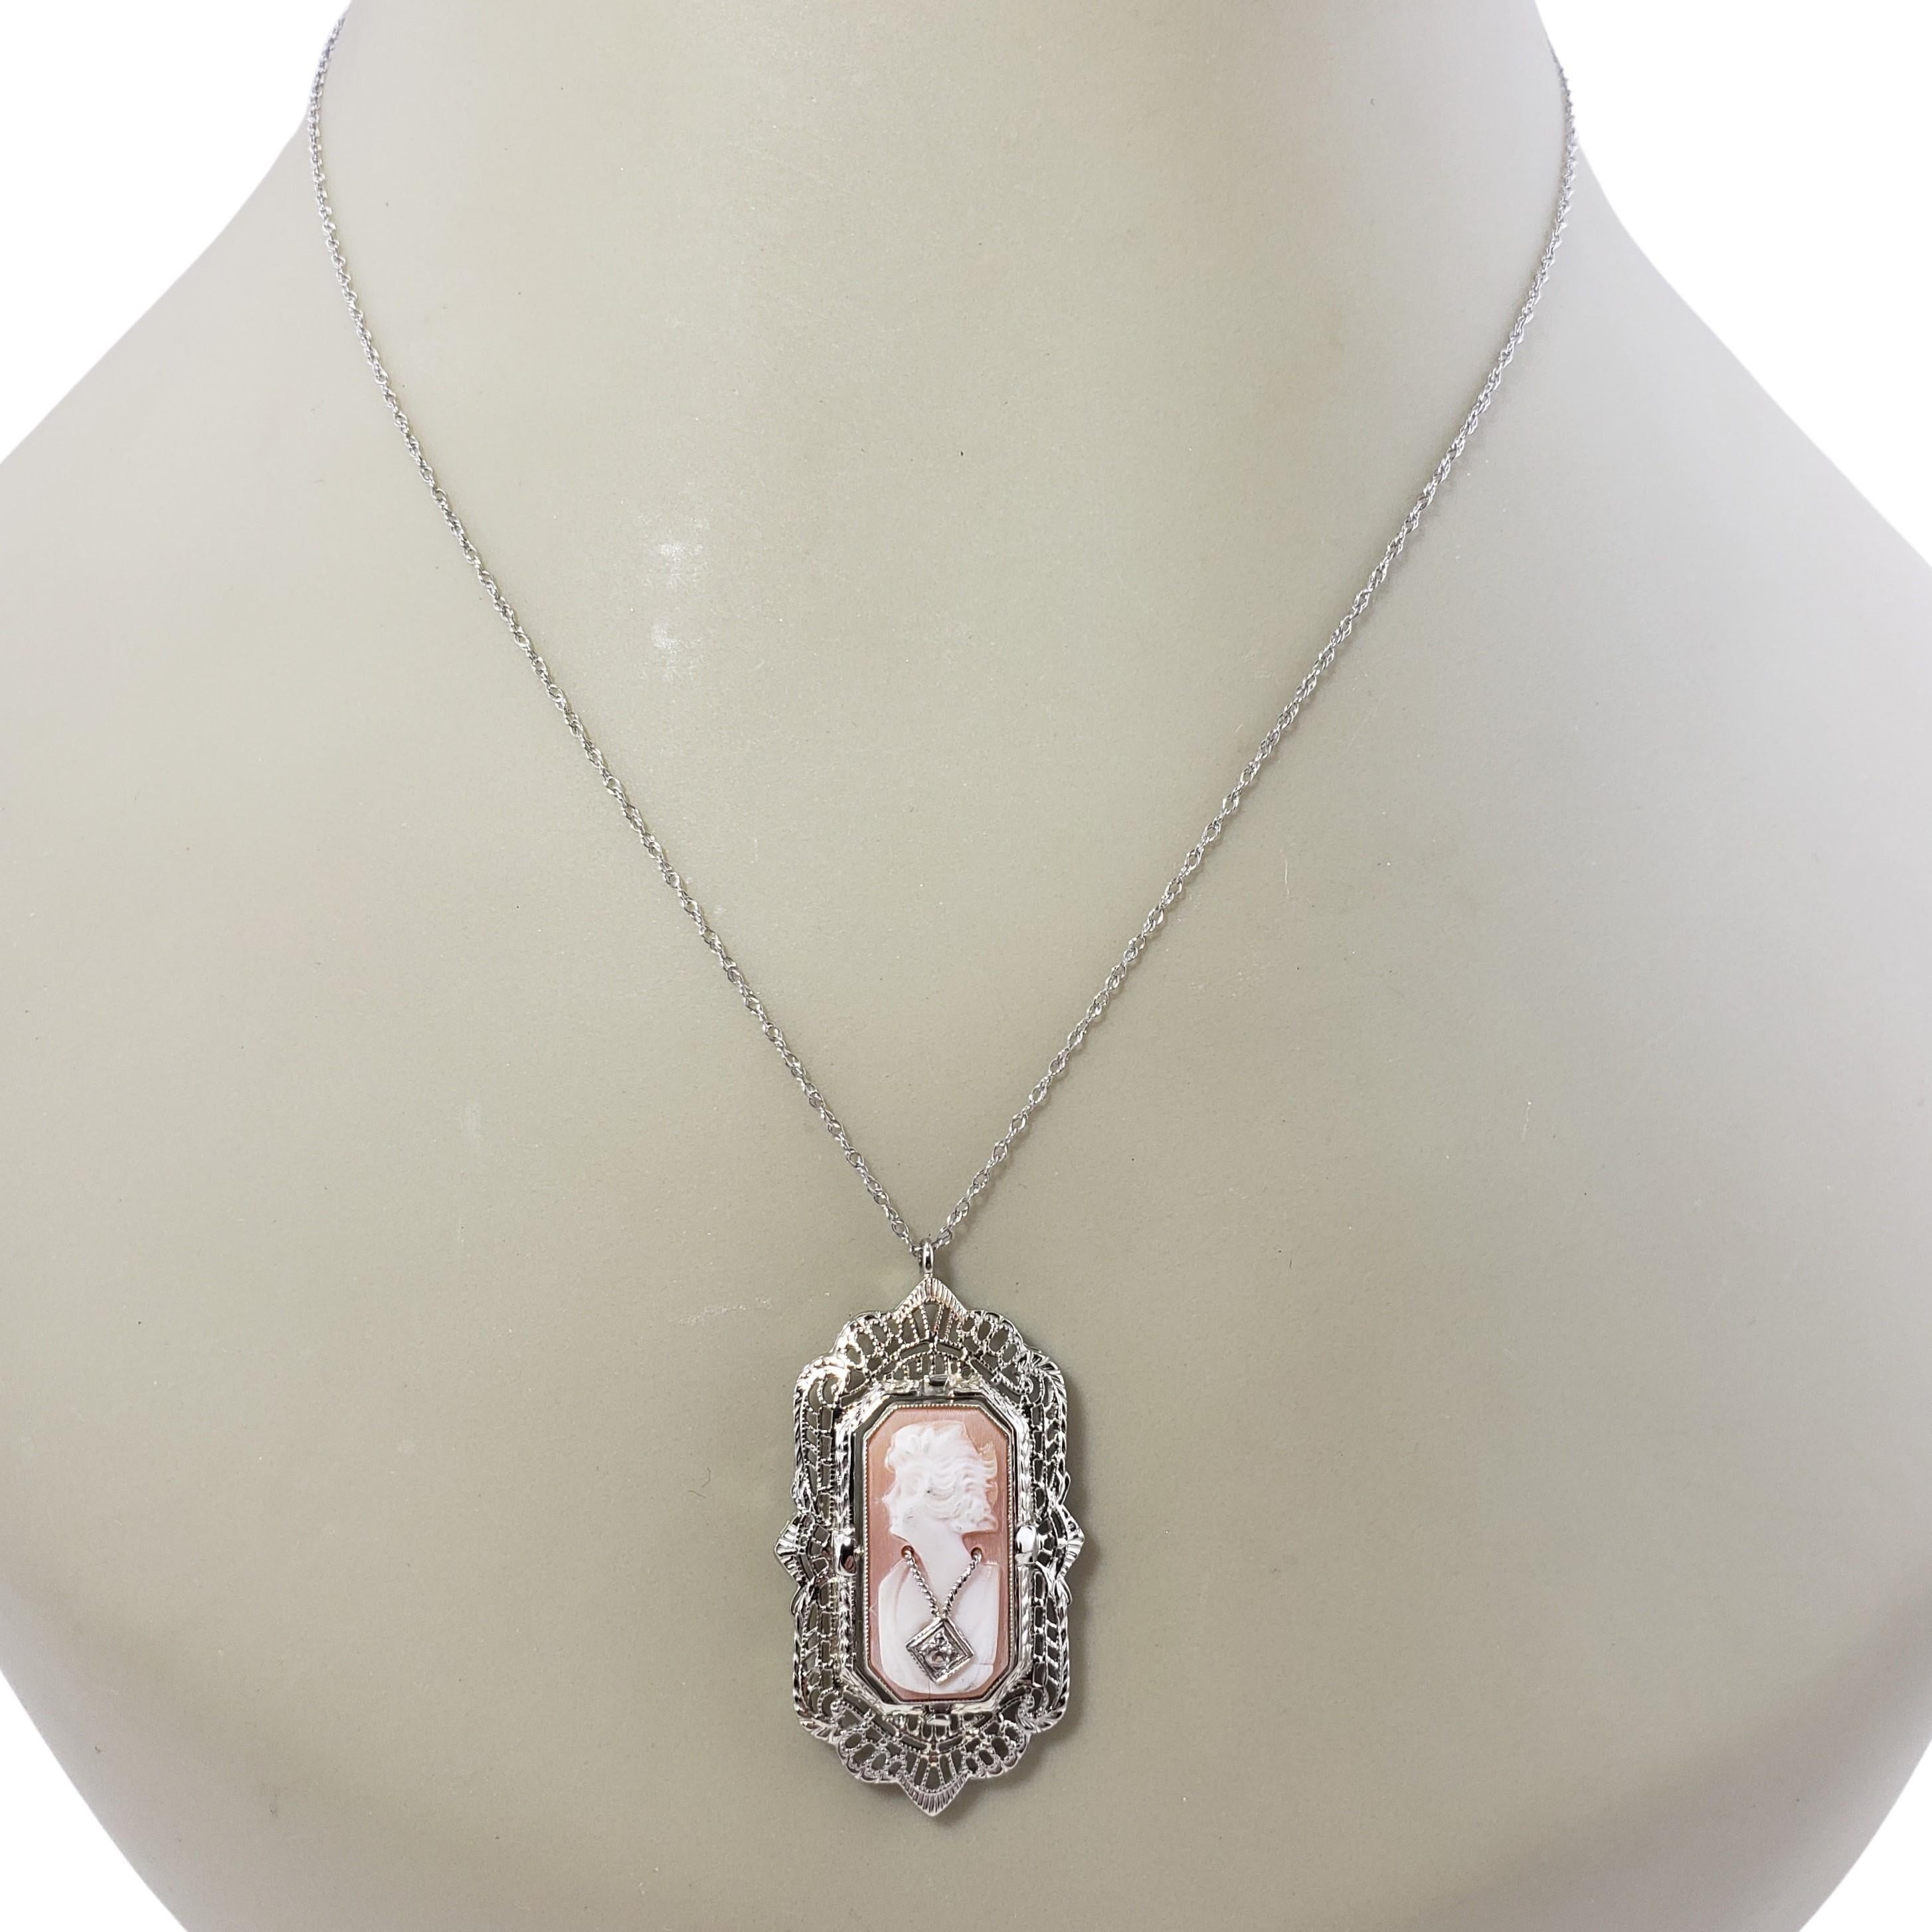 Vintage 12 Karat White Gold and Diamond Reversible Cameo Pendant-

This stunning reversible 12K white gold filigree pendant pictures a lovely lady in profile decorated with one round single cut diamond on one side. The reverse side features elegant